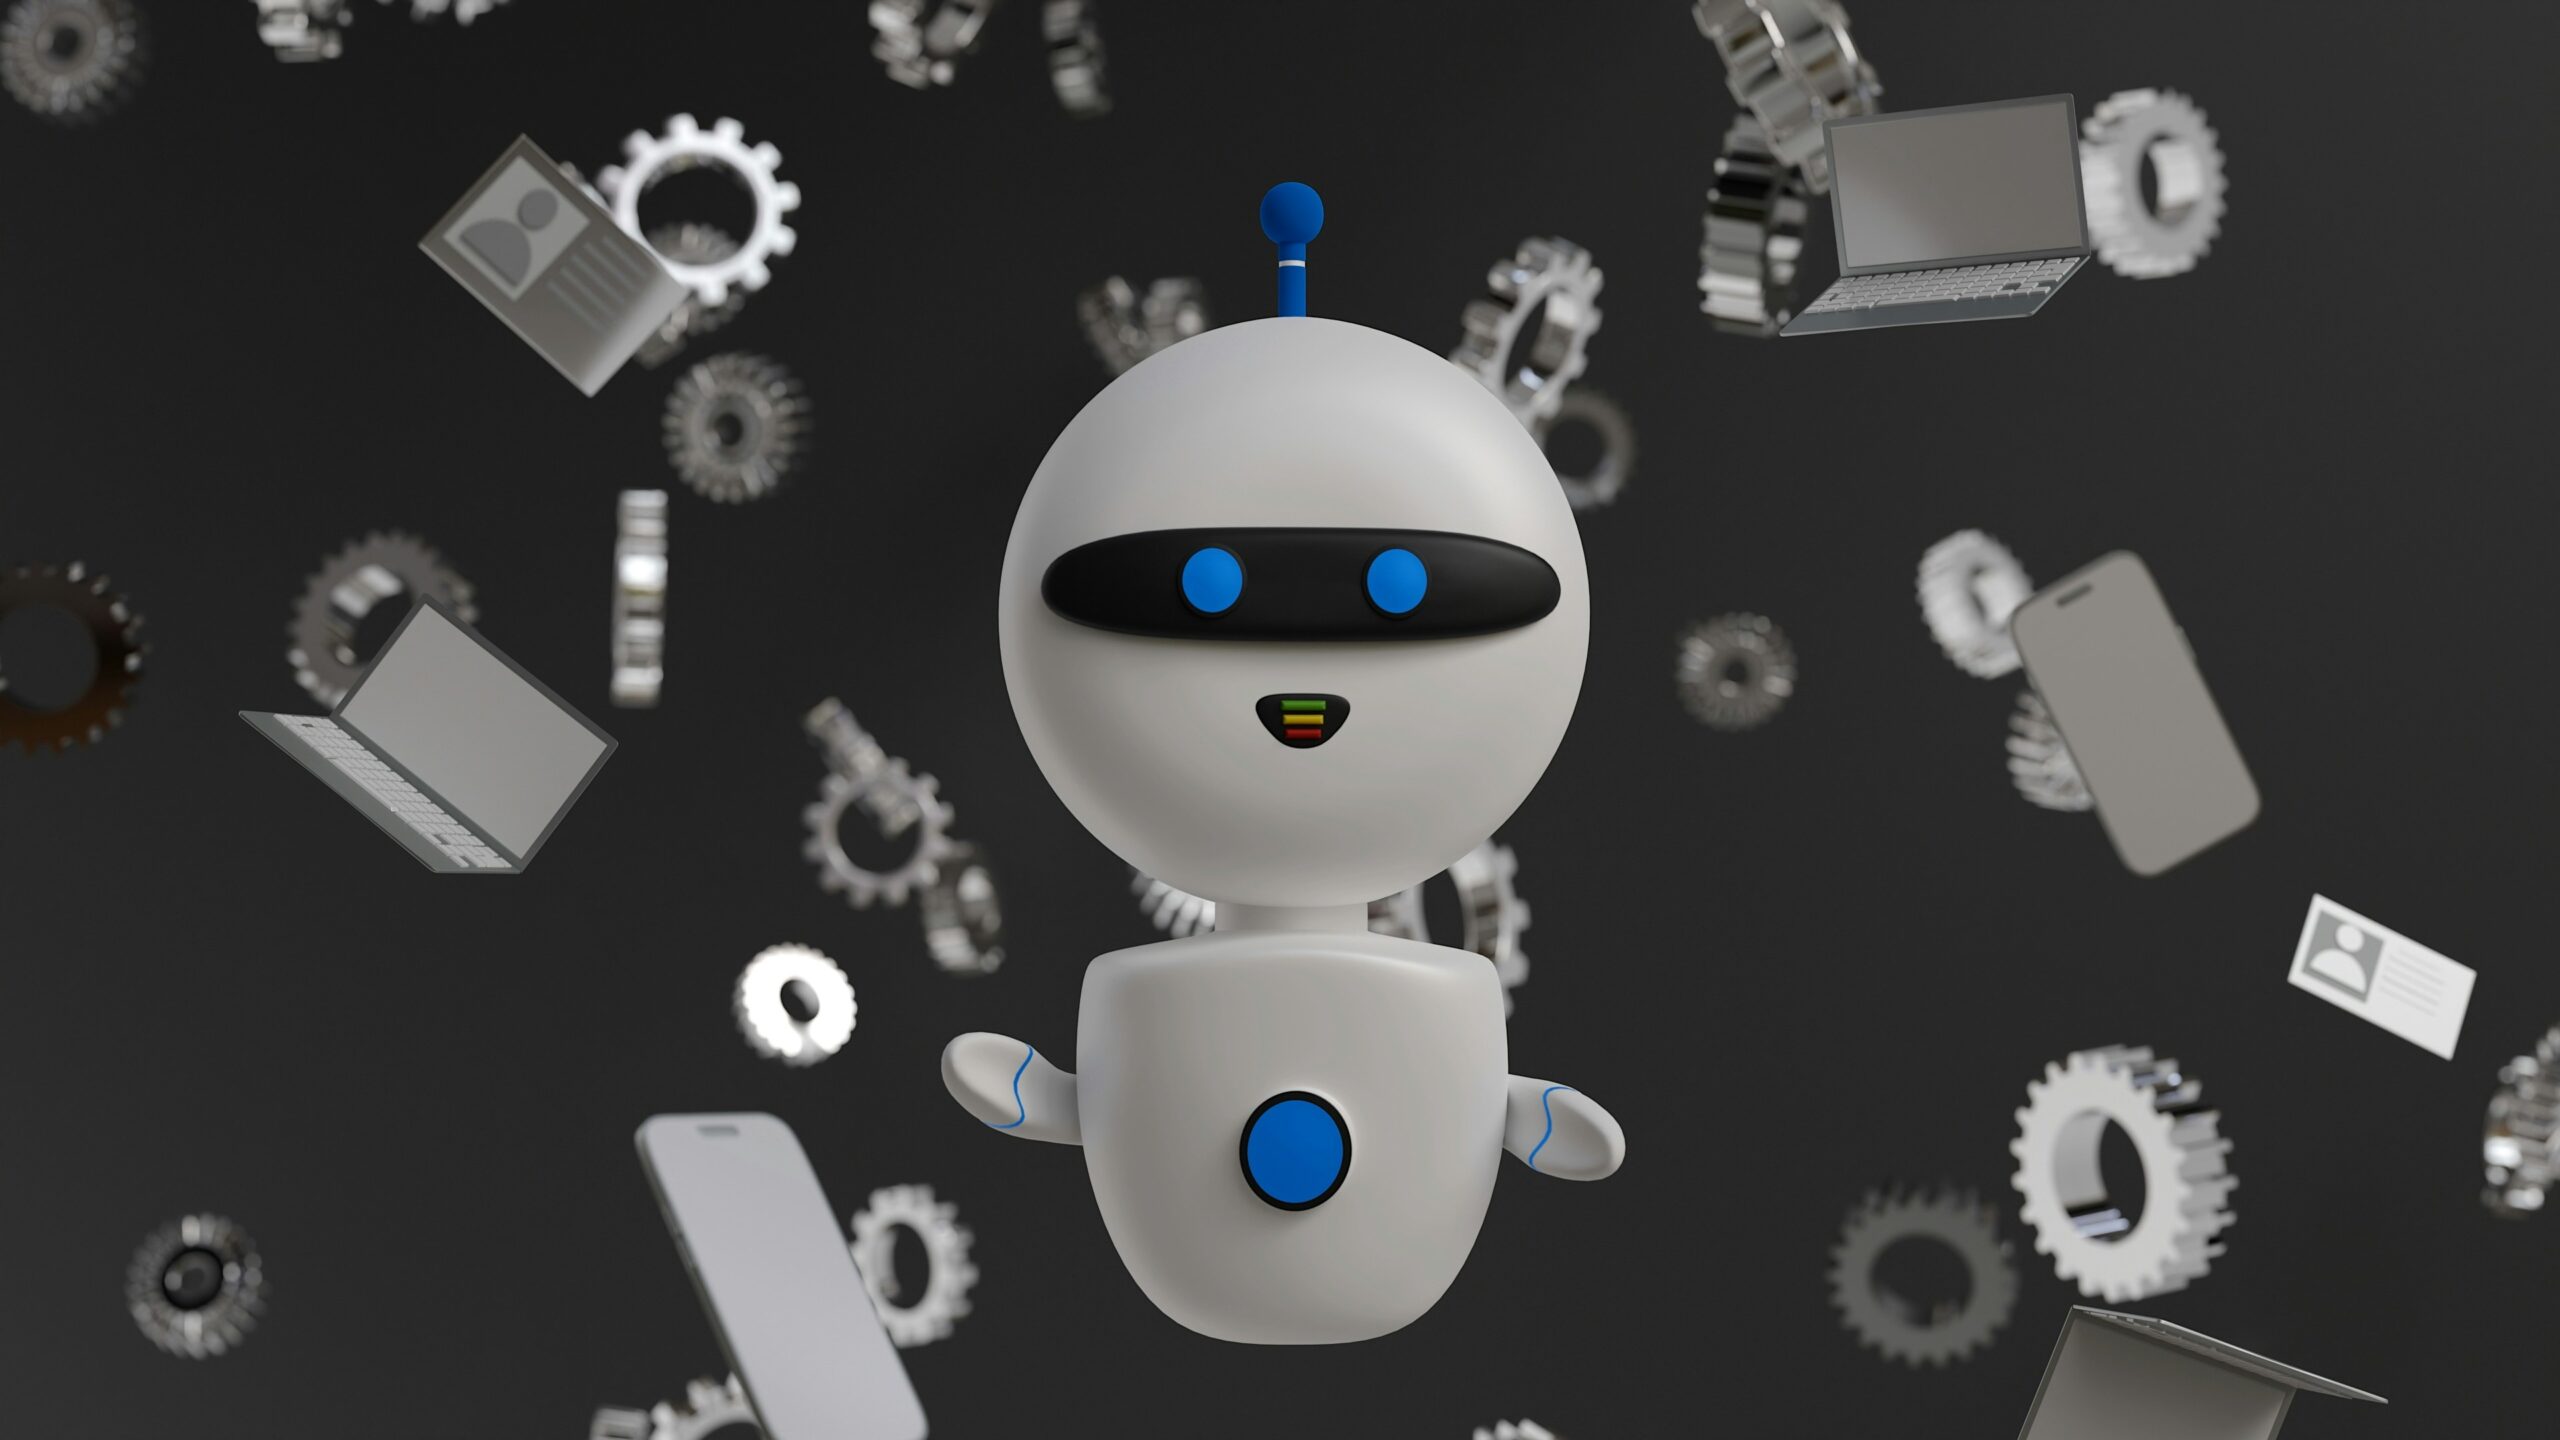 A 3D-rendered white robot with a blue antenna is surrounded by floating gears, smartphones, laptops, and ID cards, exemplifying workflow automation.